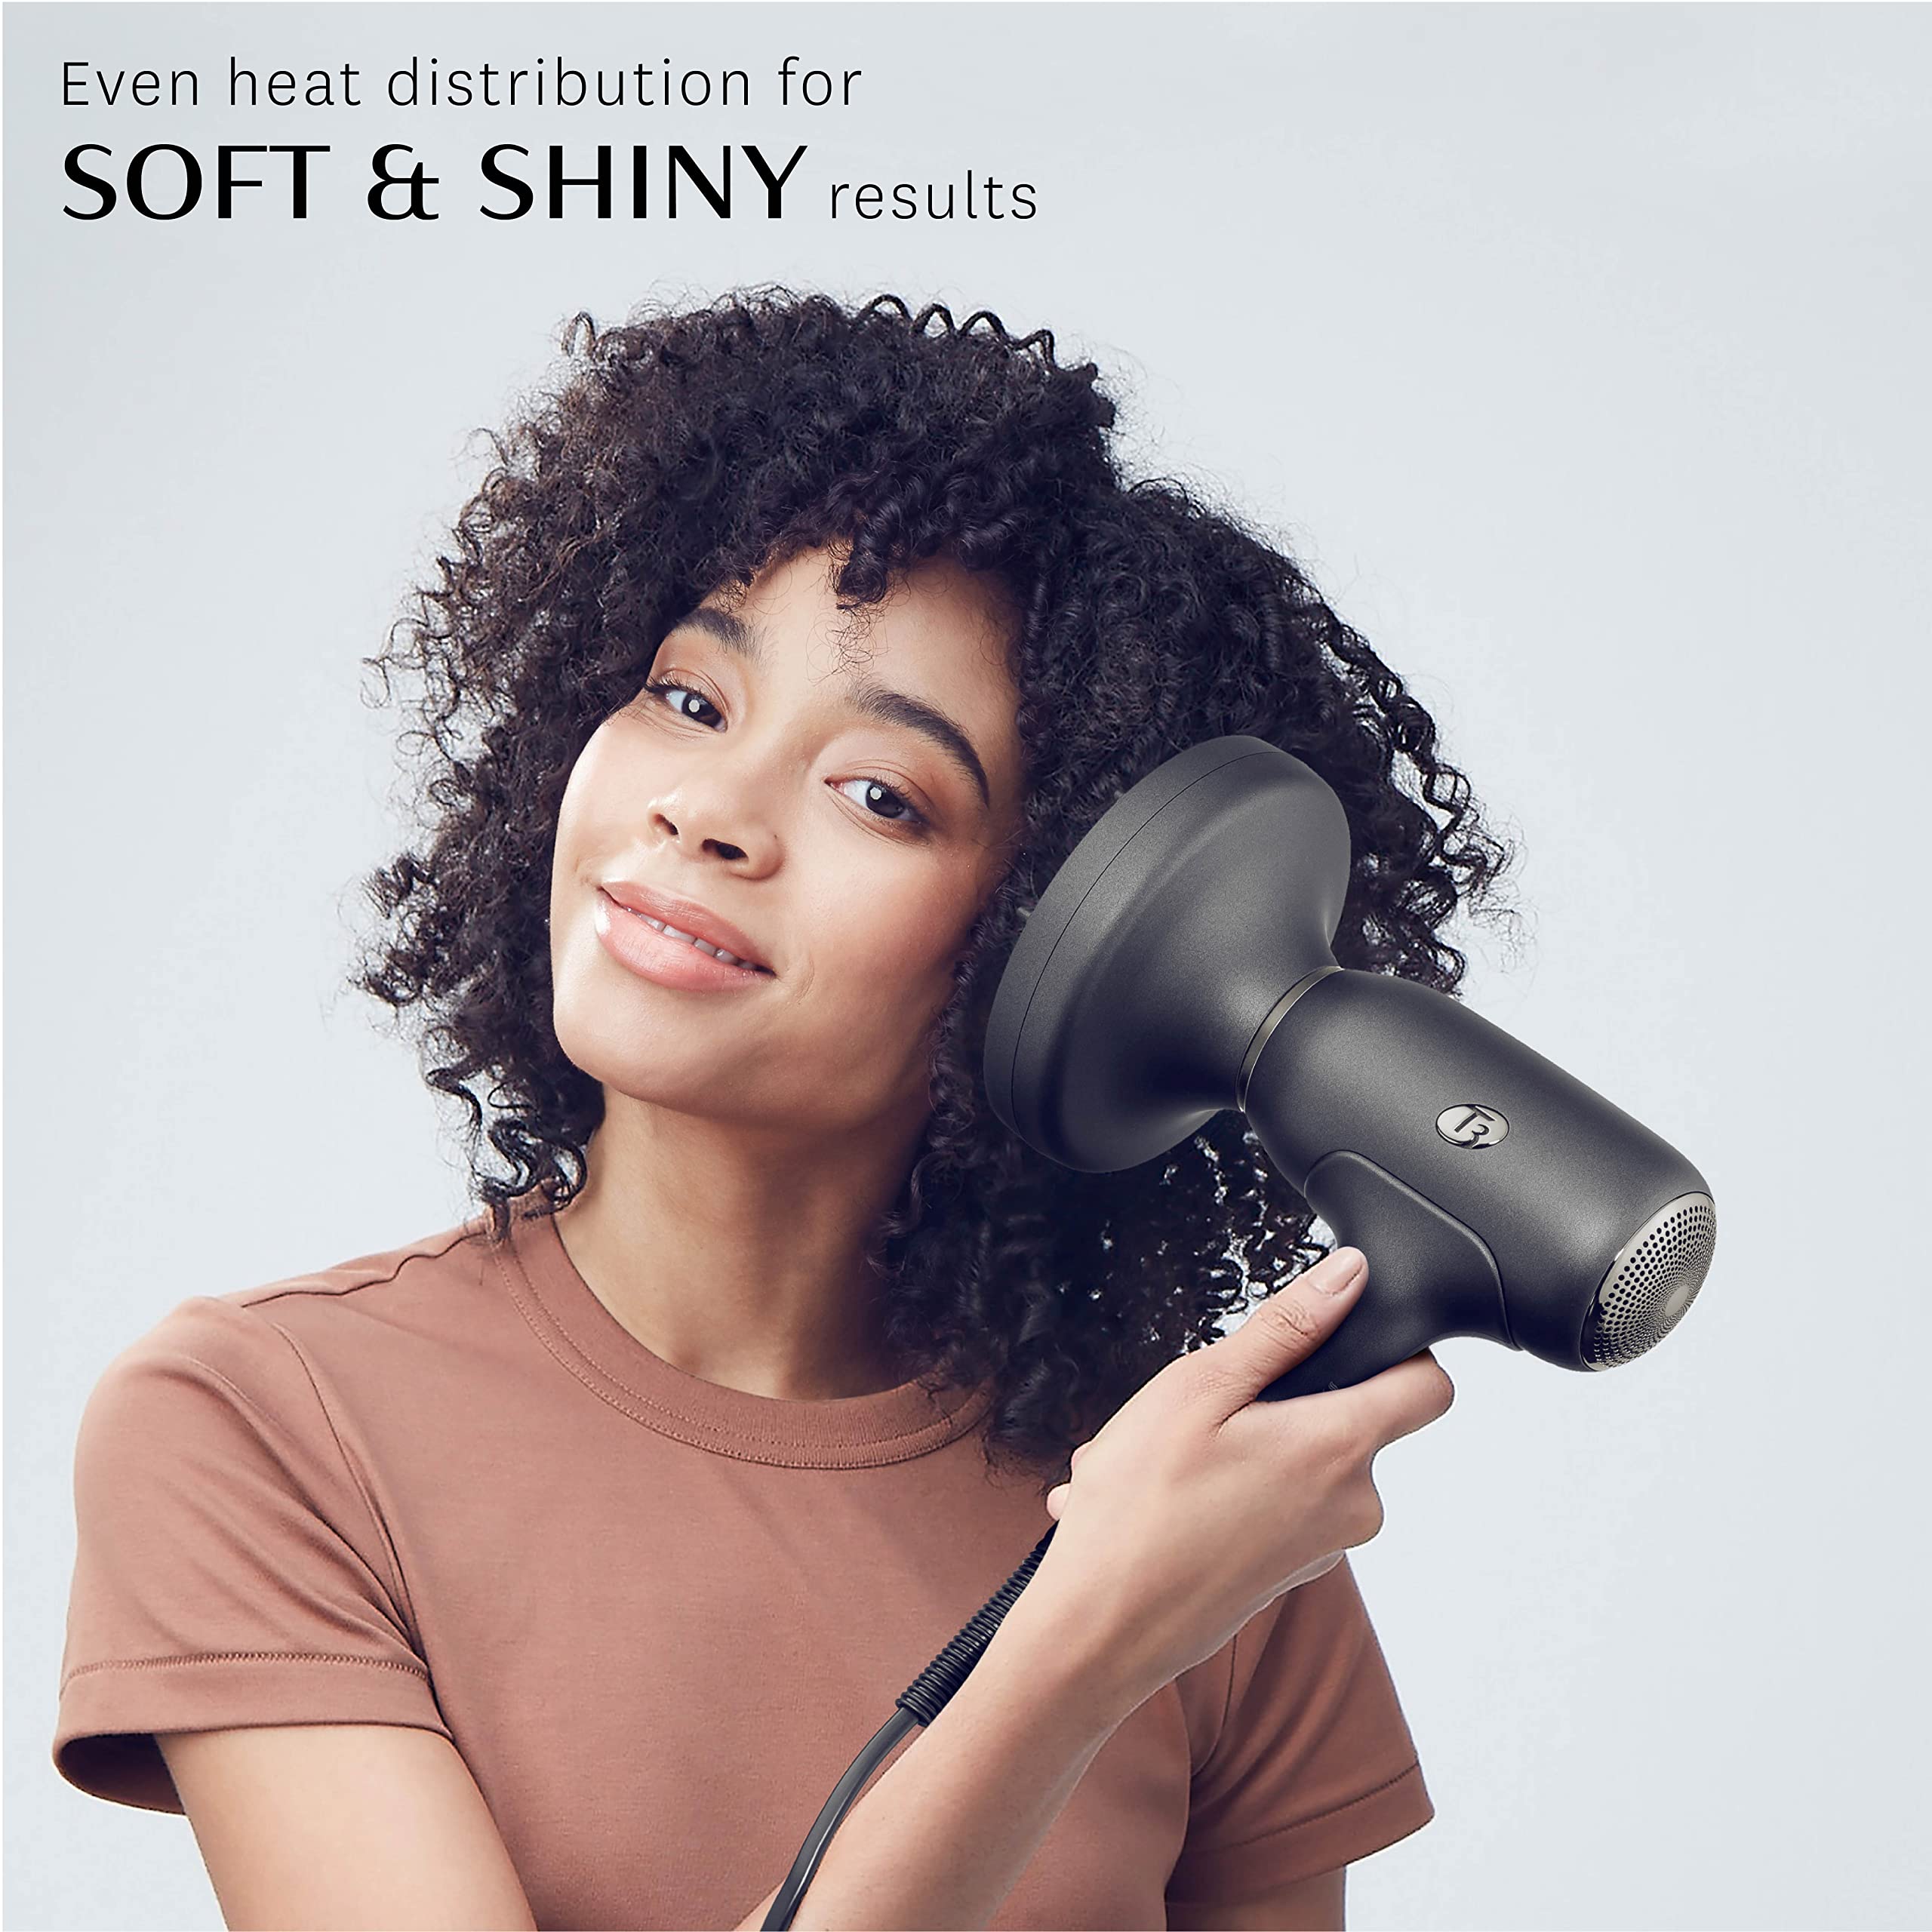 T3 Fit Diffuser | Compatible with T3 Fit Ionic Hair Dryer only | Volumize, Define Curls and Eliminate Frizz for Wavy, Curly or Coily Hair